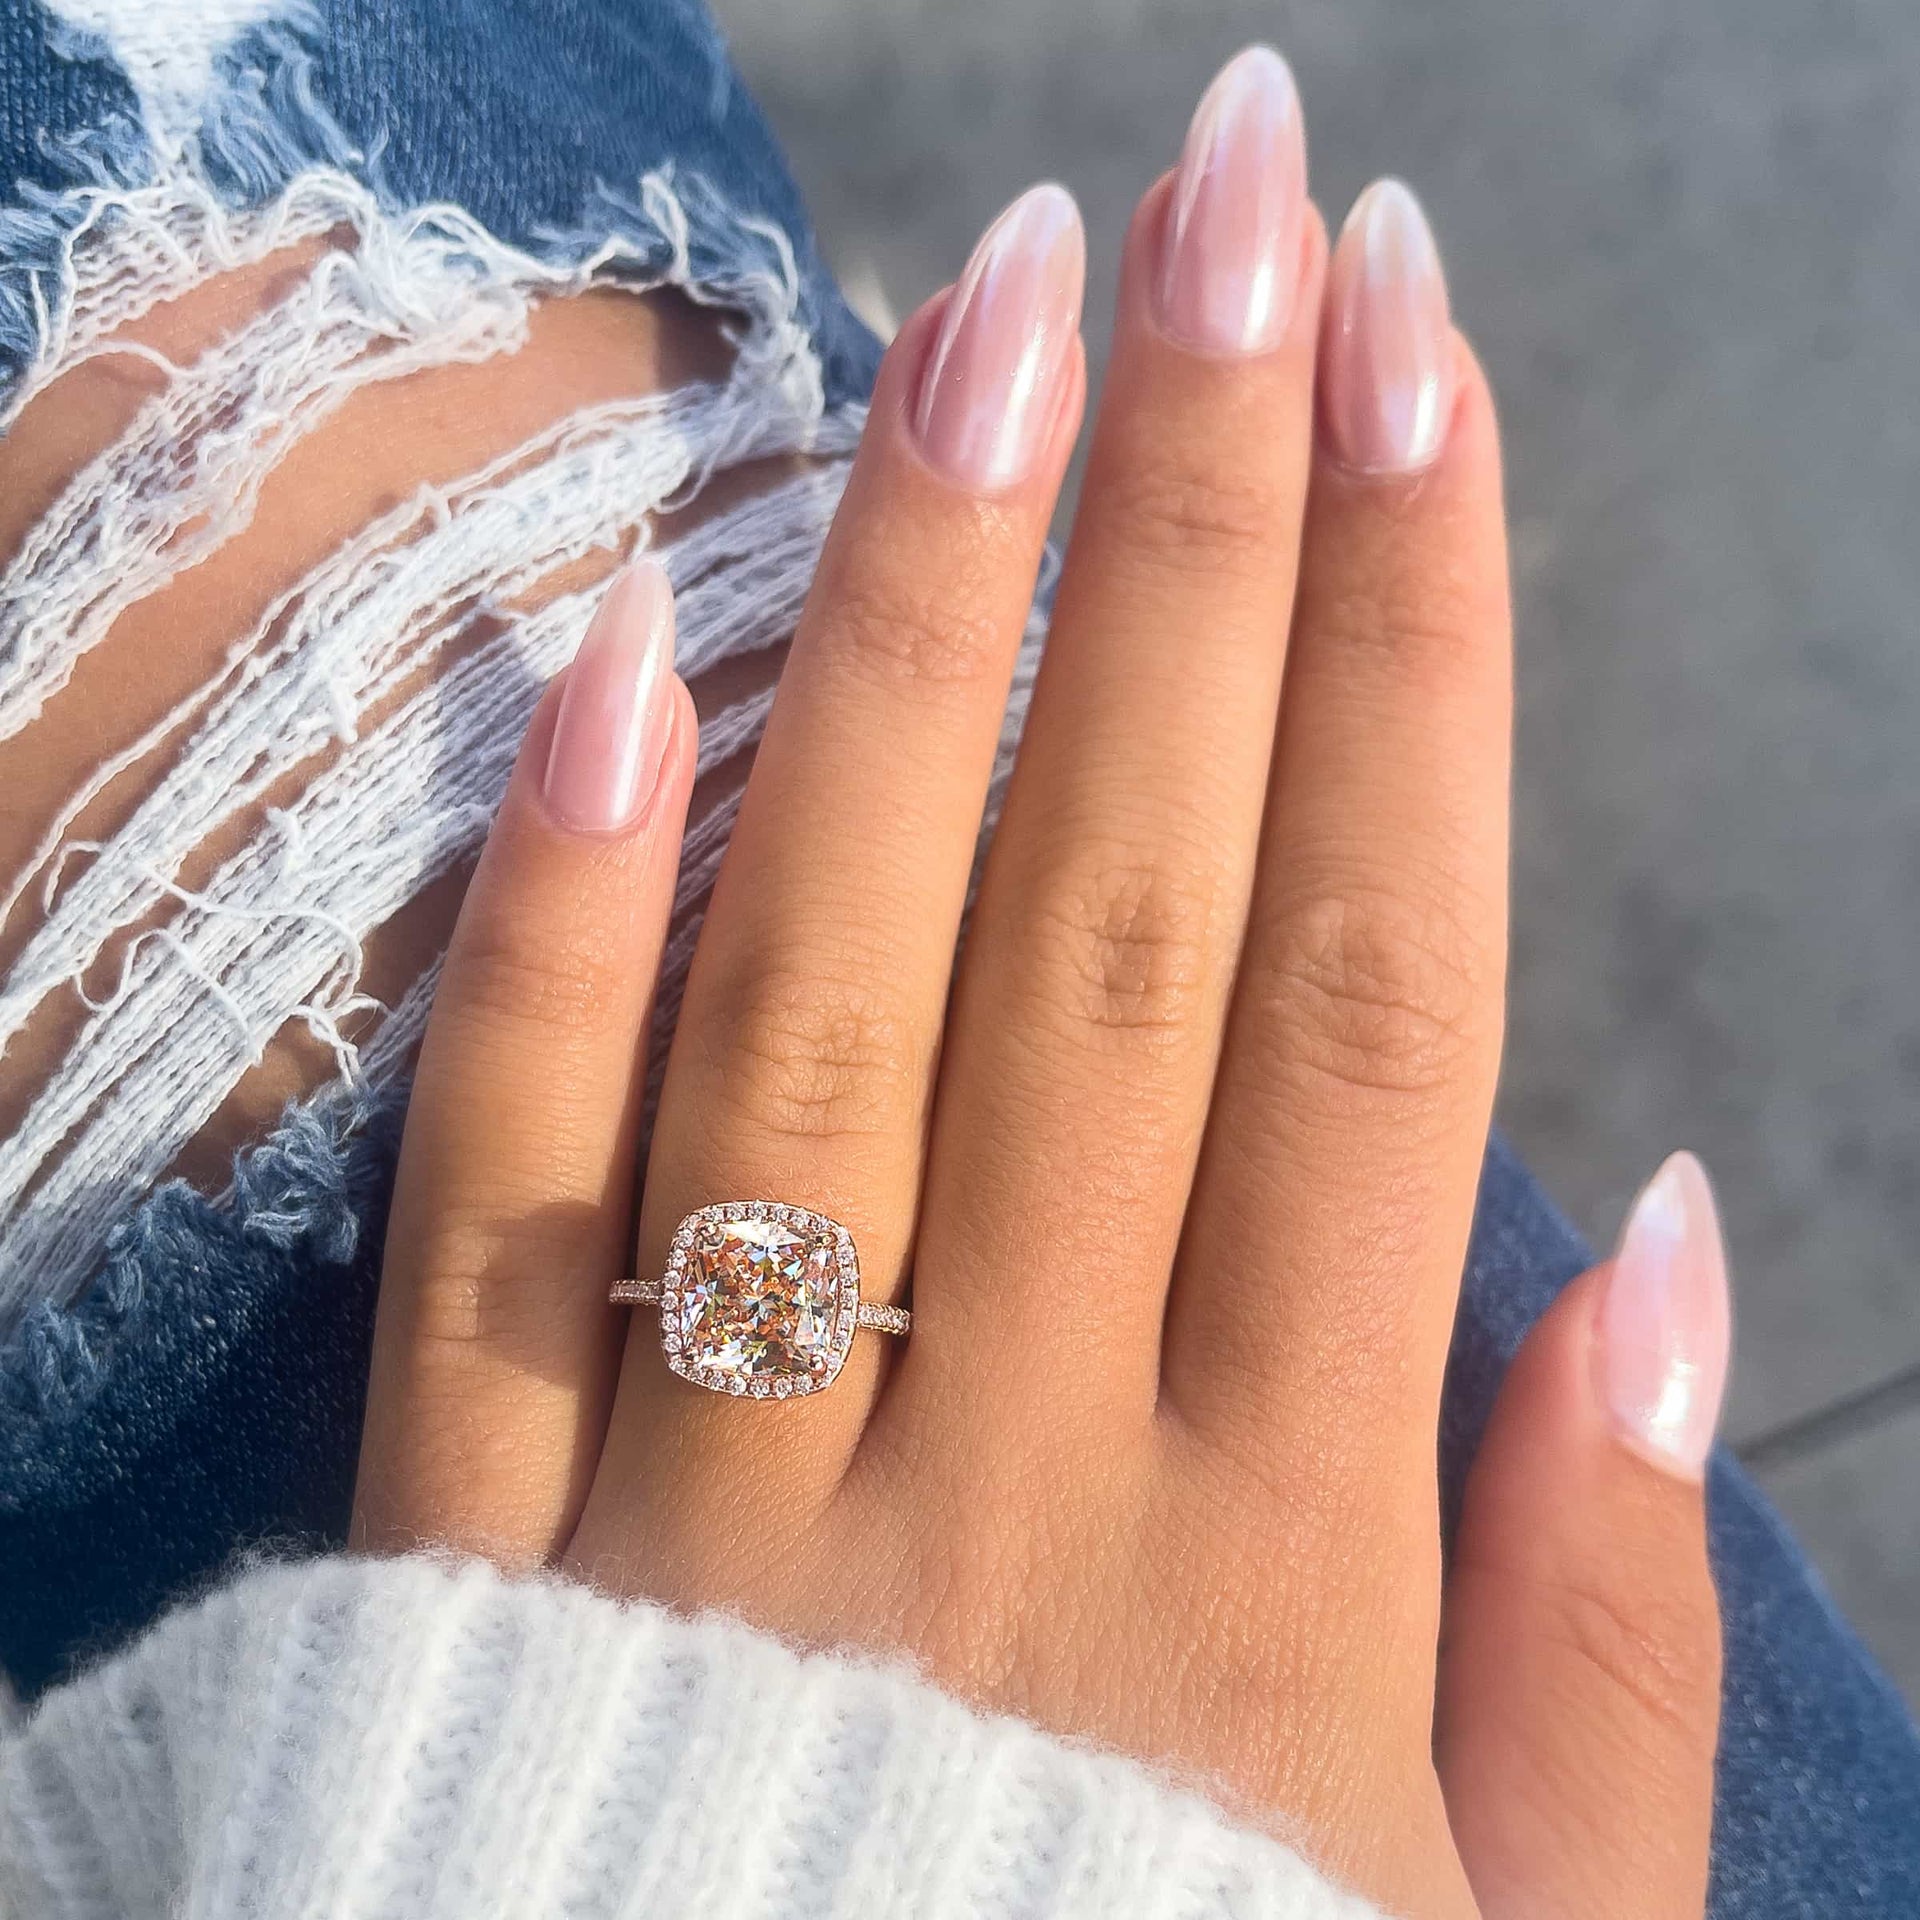 lovely rose gold cushion cut engagement ring on ladies hand with jeans